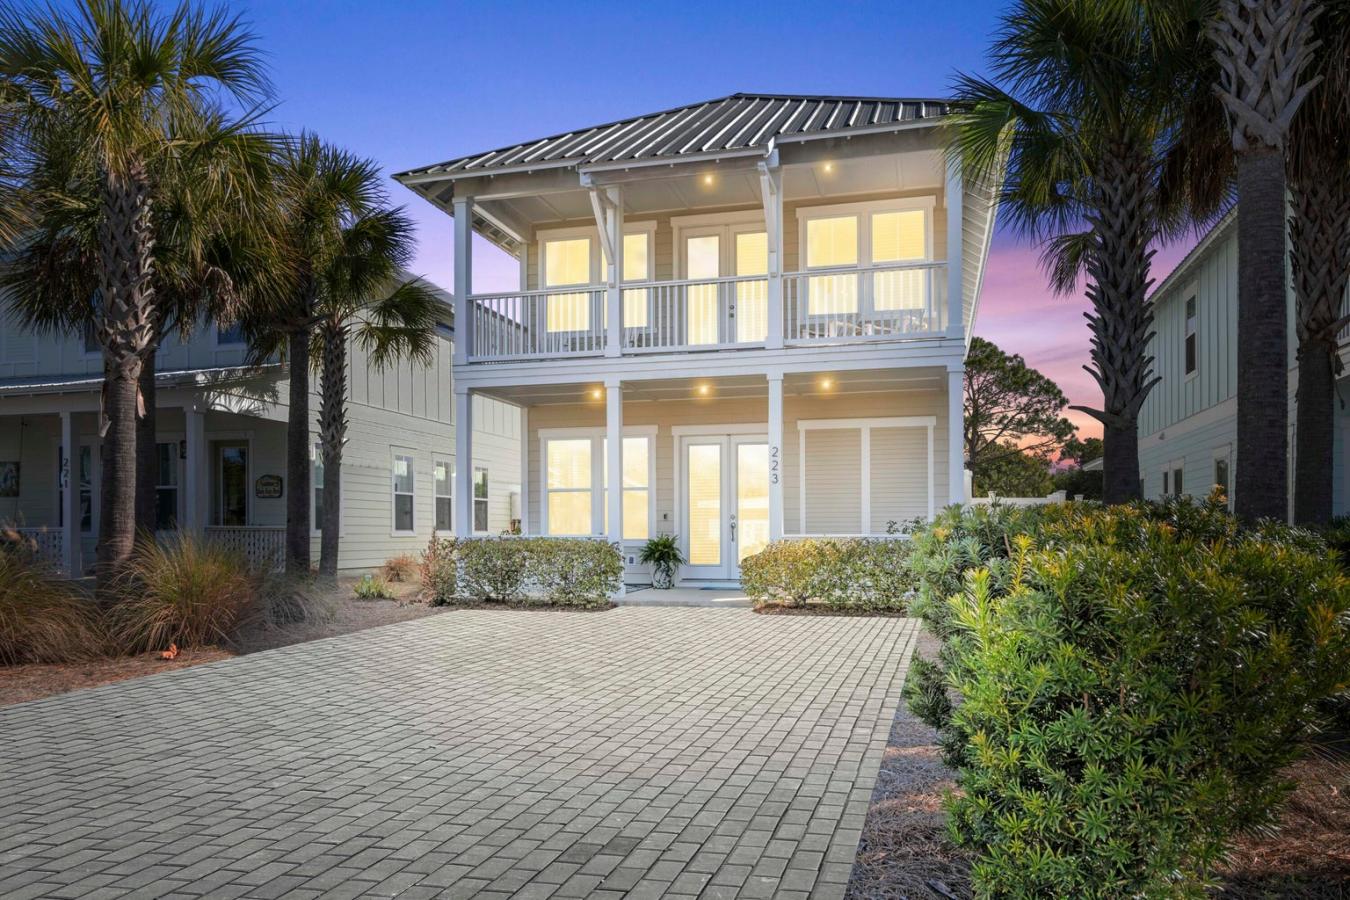 223 Sands Street, Panama City Beach, Florida, 32413, United States, 4 Bedrooms Bedrooms, ,4 BathroomsBathrooms,Residential,For Sale,223 Sands Street,1428852